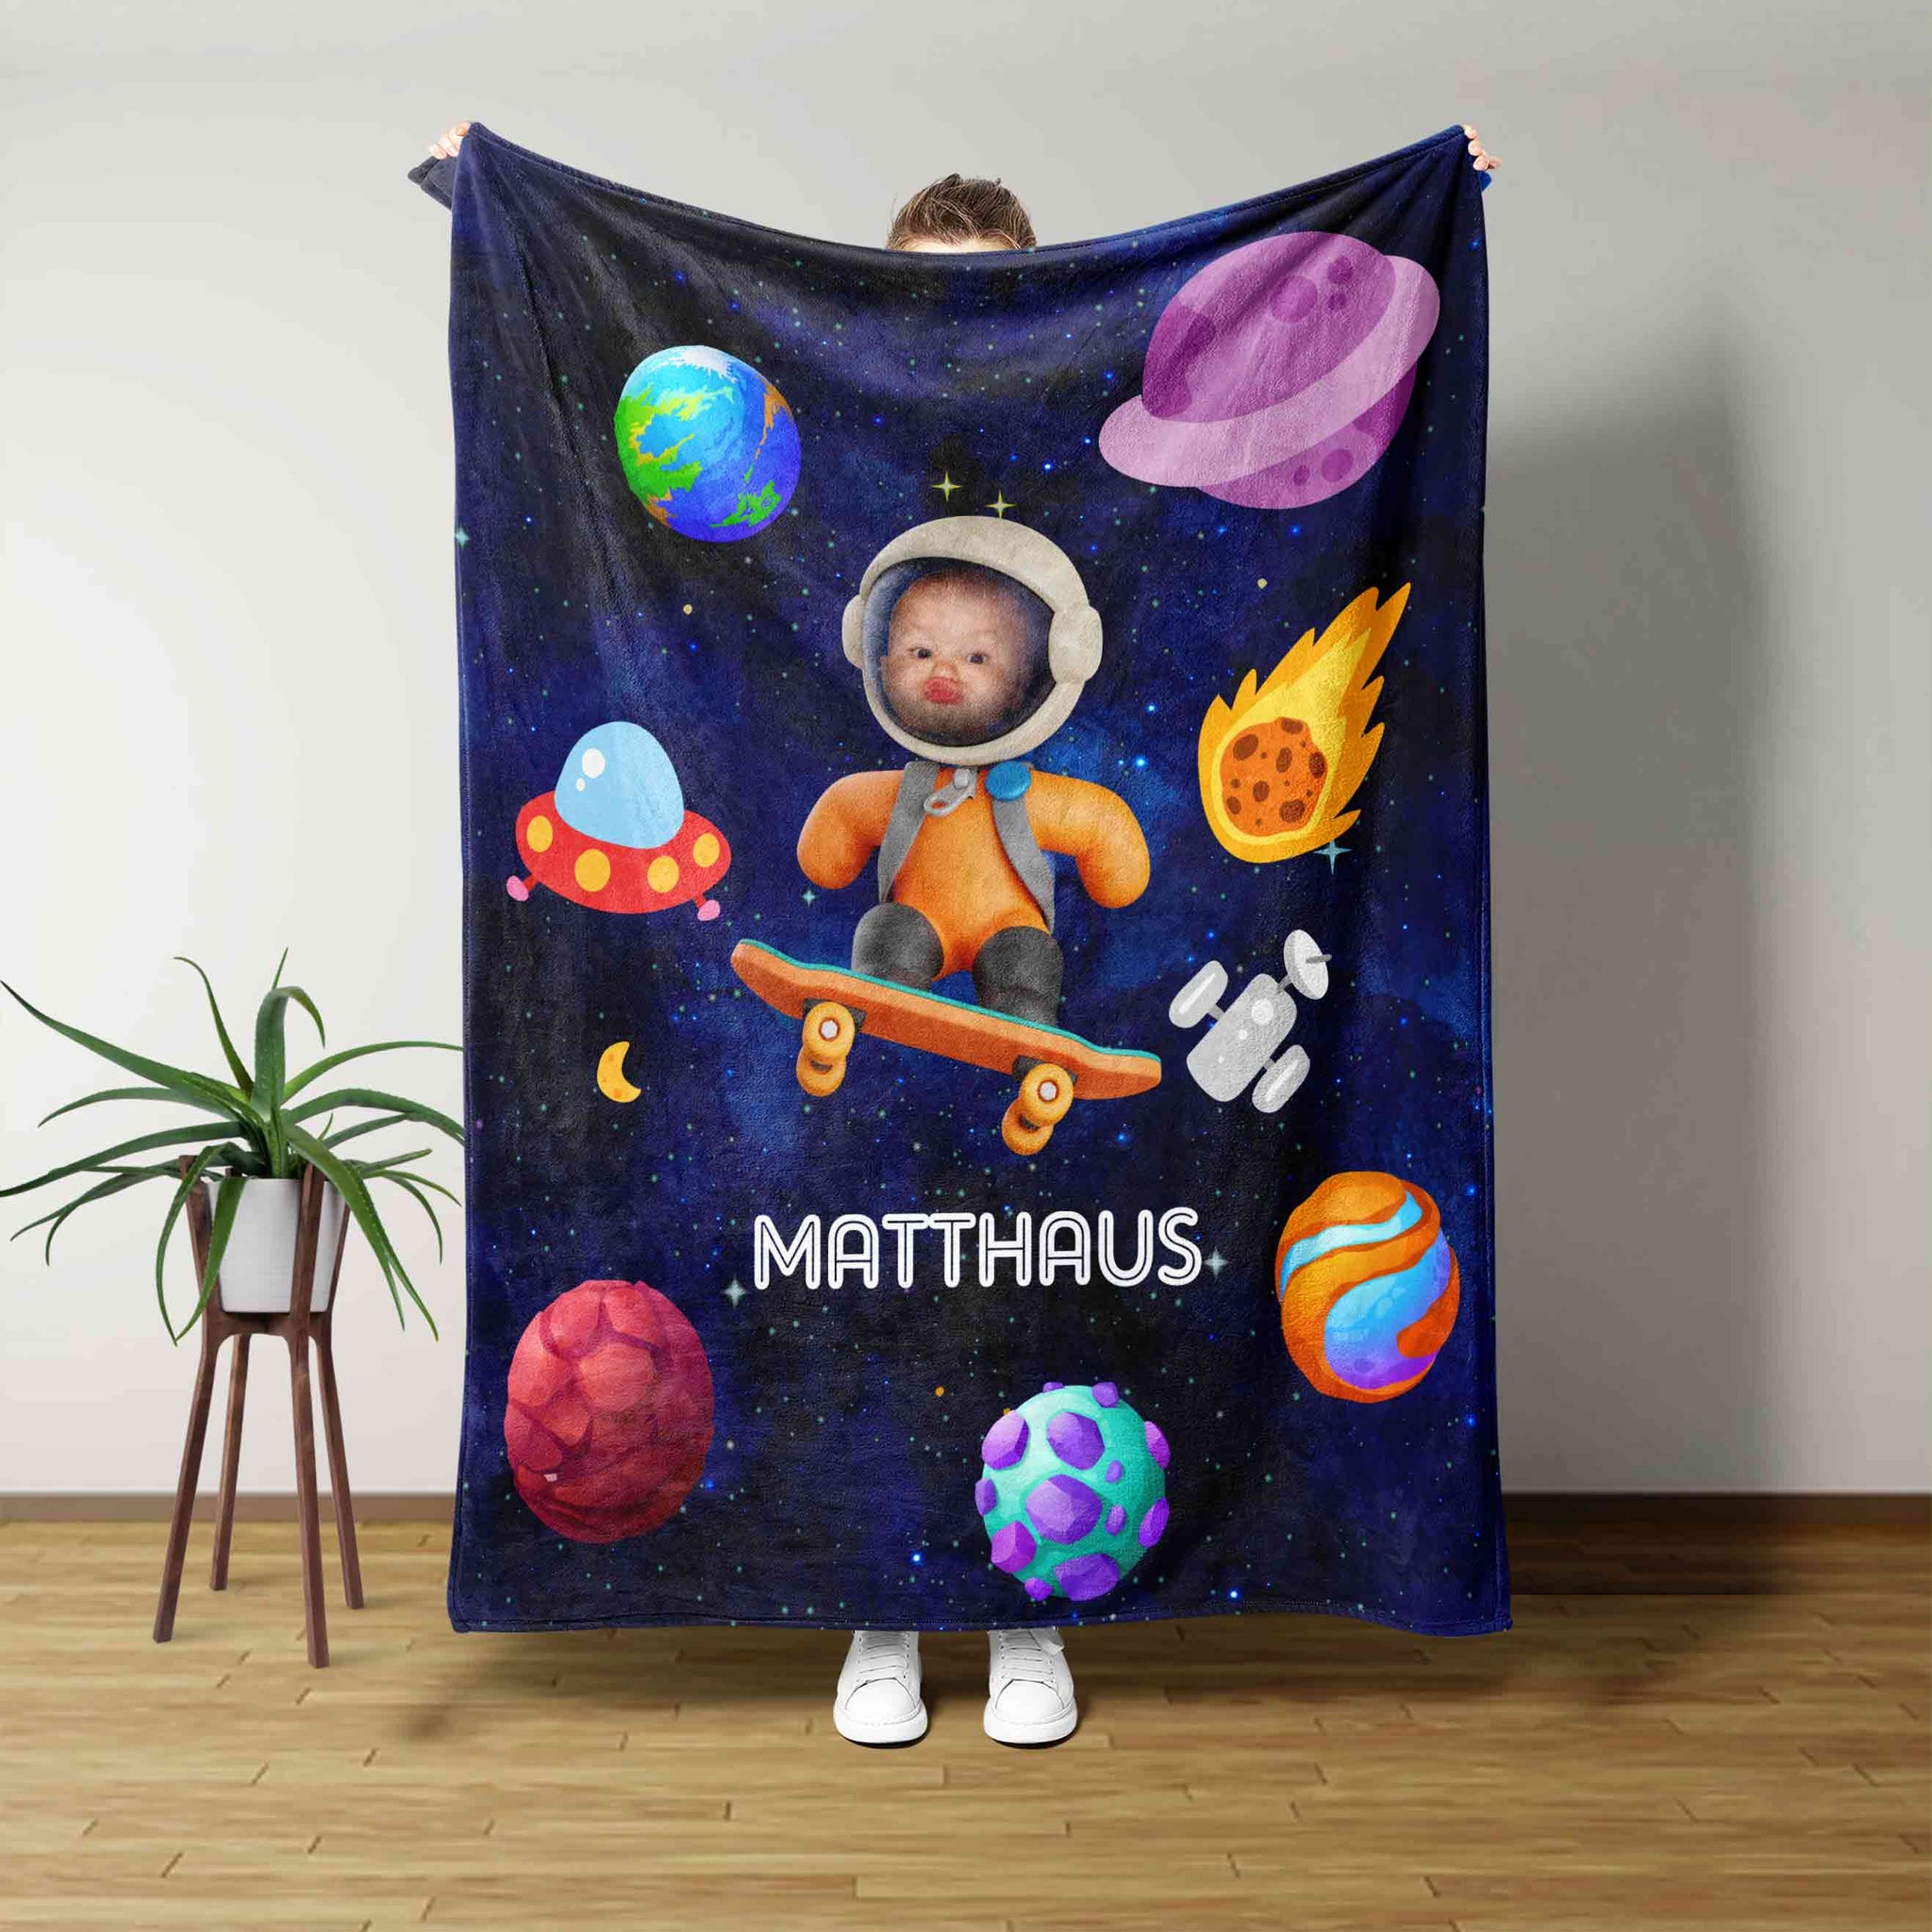 Personalized Baby Blanket, Outer Space Blanket, Baby Blanket, Planet Blanket, Custom Face Blanket, Blanket For Baby, Baby Gift, Gift Idea For Baby